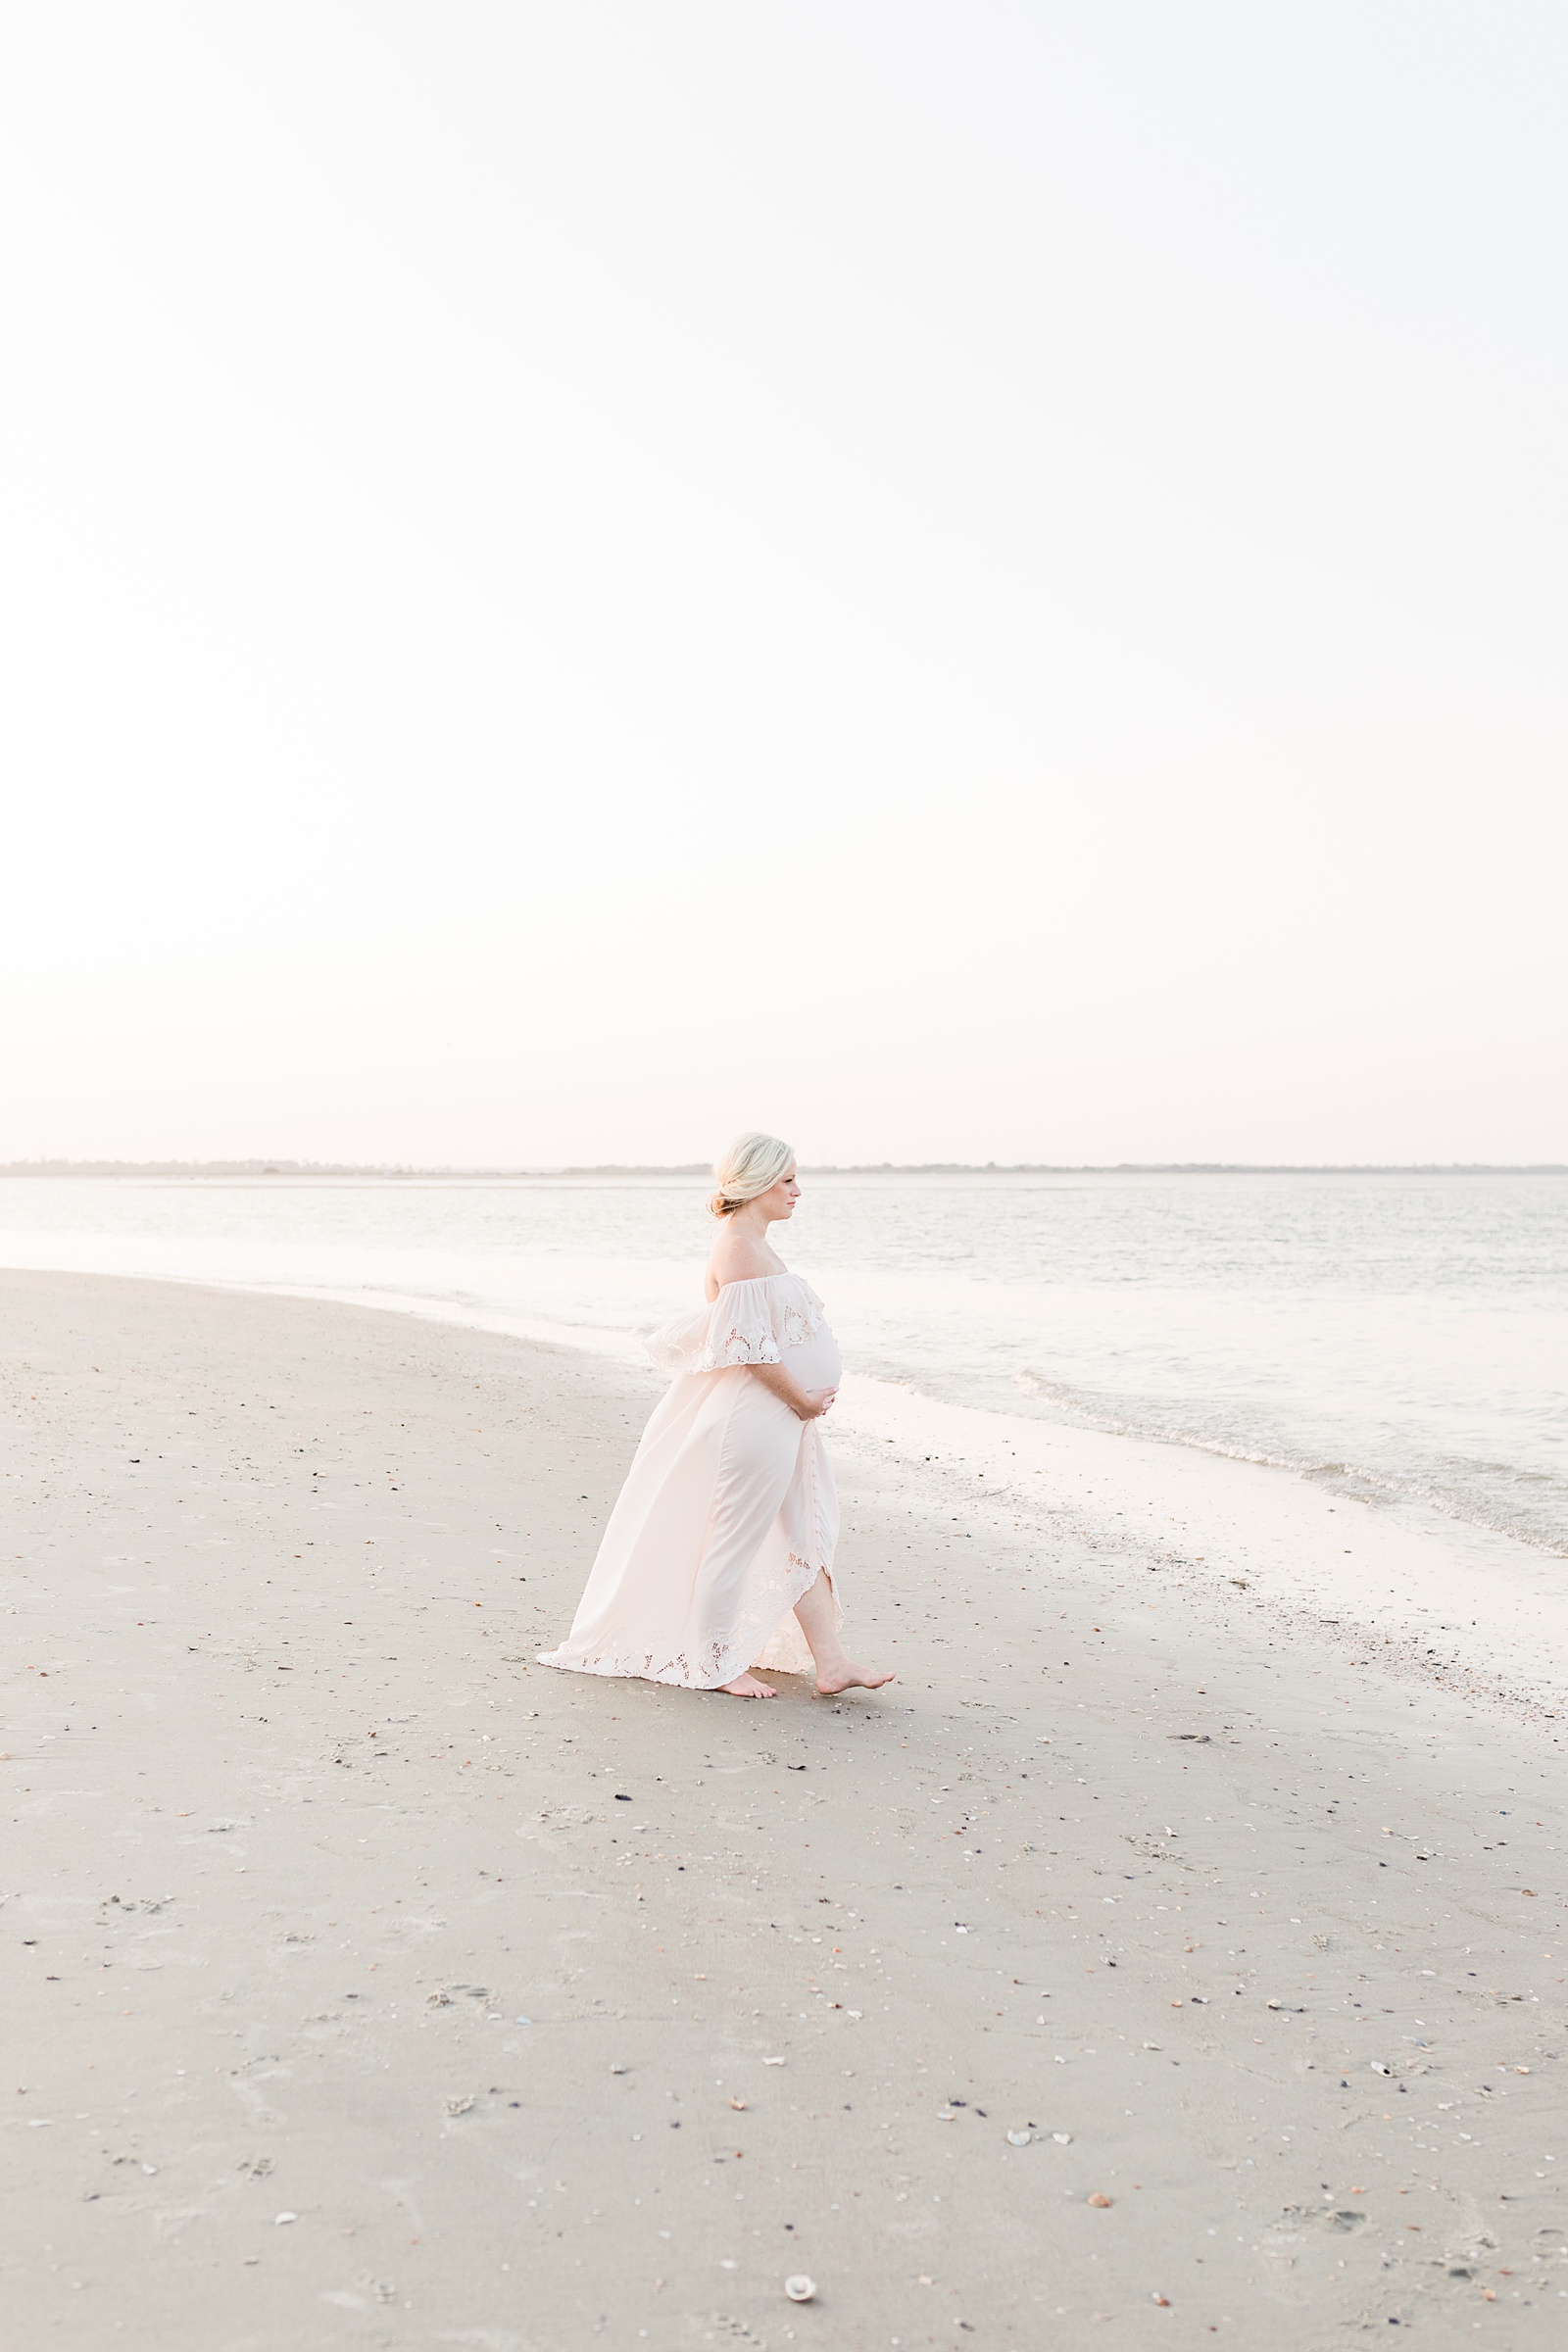 Beach maternity photo with mom in lace maxi dress by Caitlyn Motycka Photography